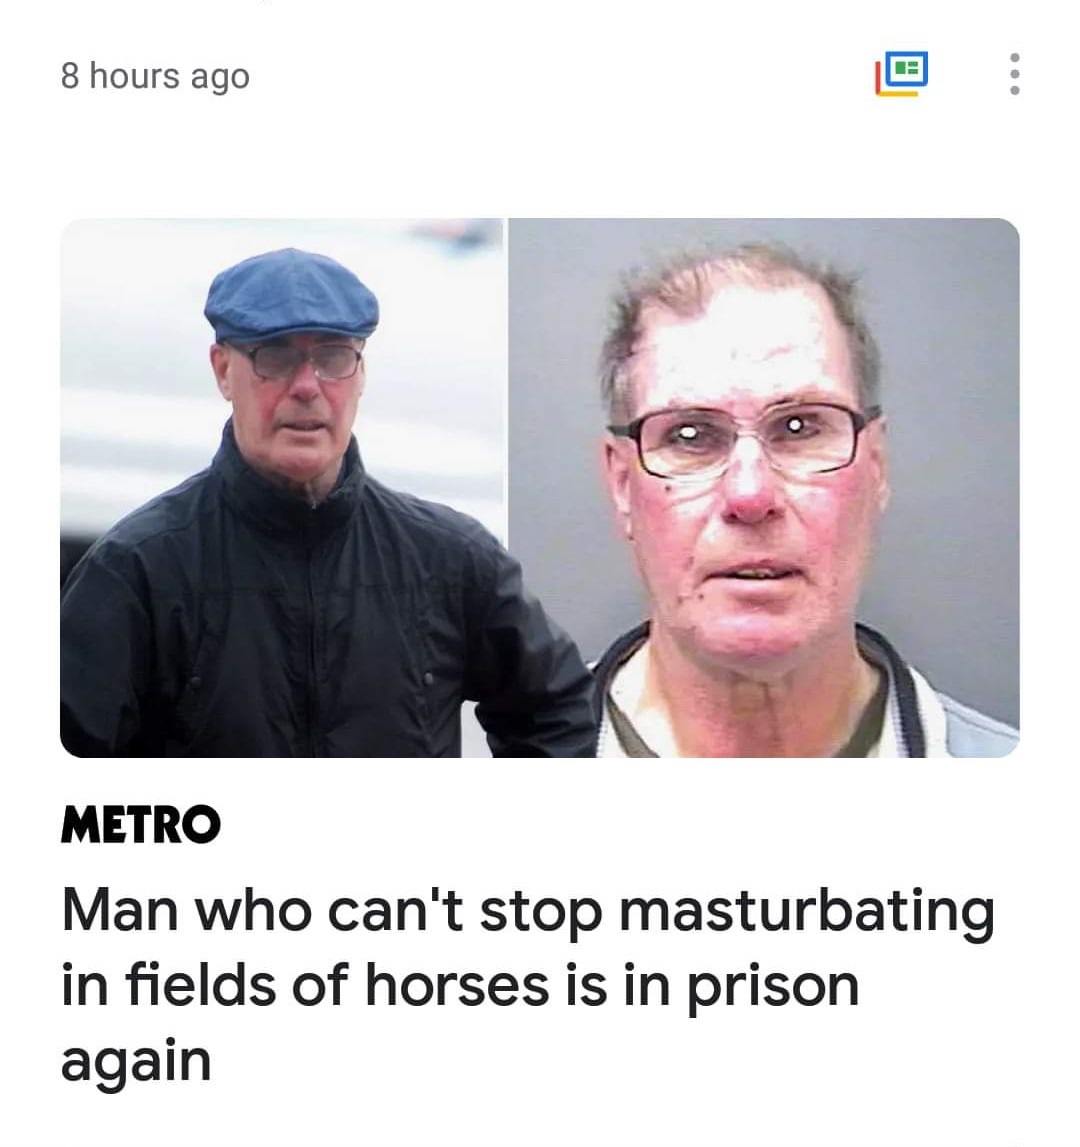 metro - 8 hours ago Metro Man who can't stop masturbating in fields of horses is in prison again